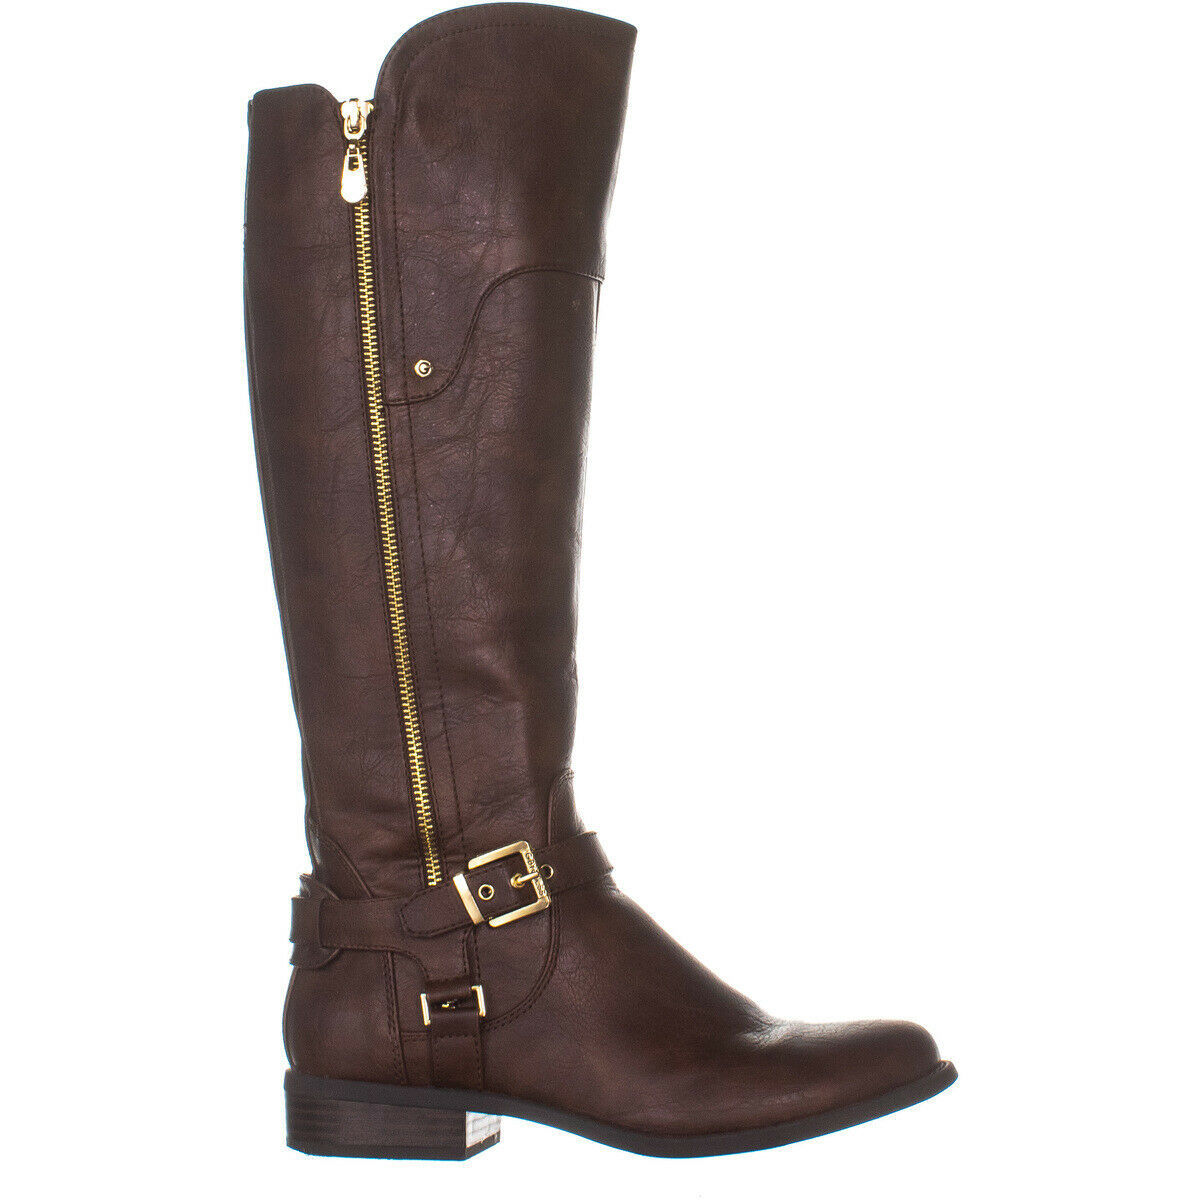 G by Guess Harson Tall Riding Boots, Dark Brown 151, Dark Brown, 8.5 US ...